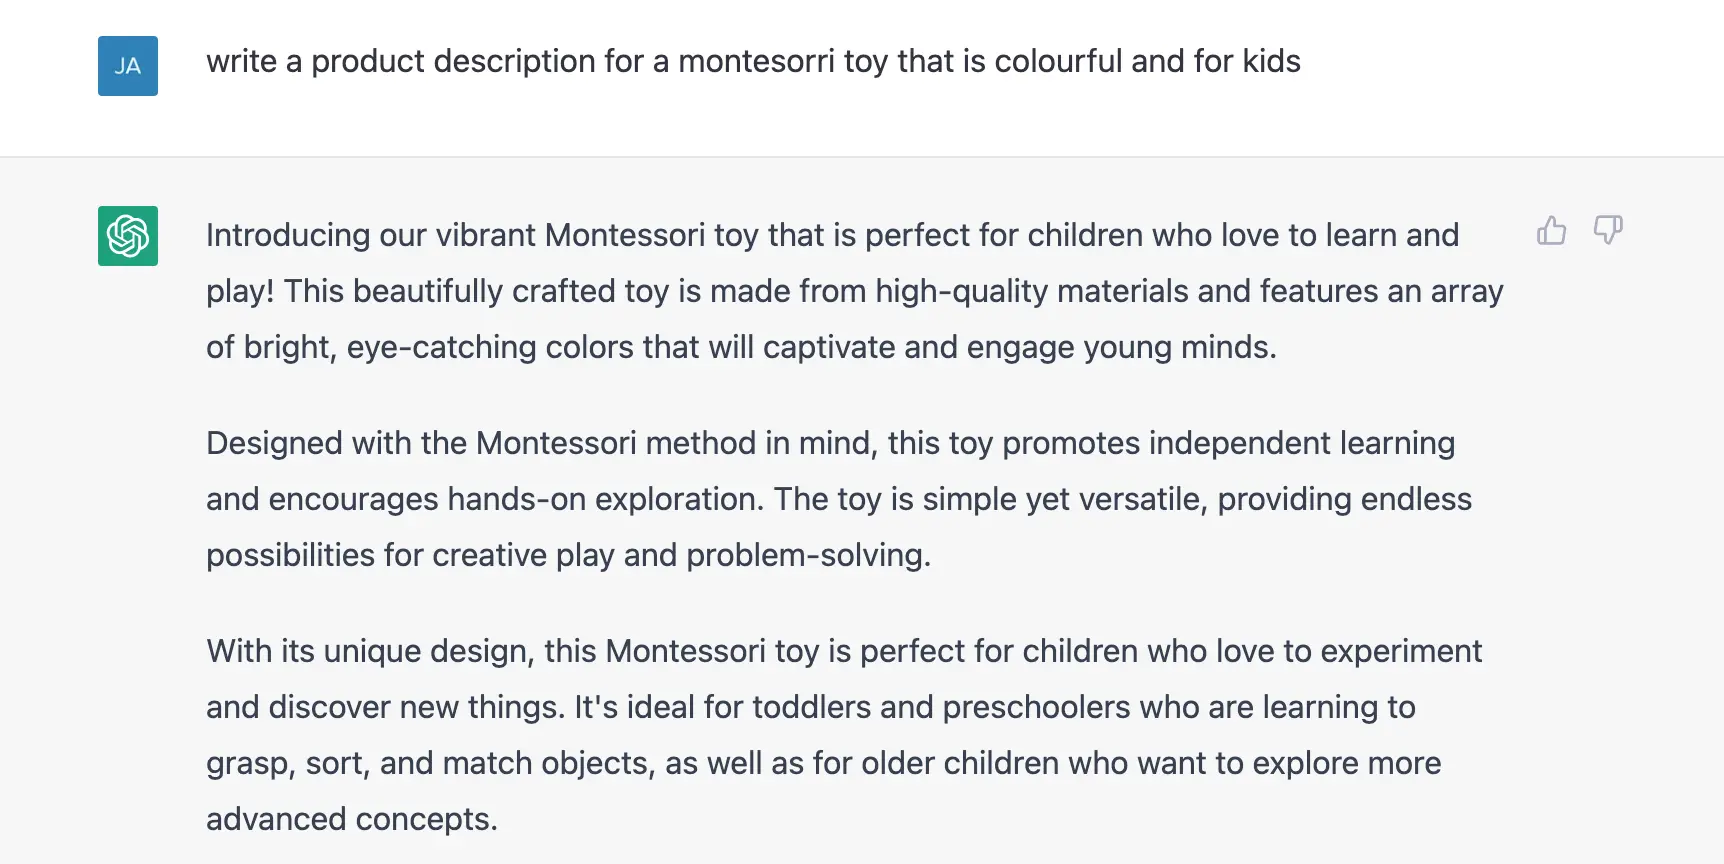 Asking ChatGPT to write me a product description for a montesorri toy